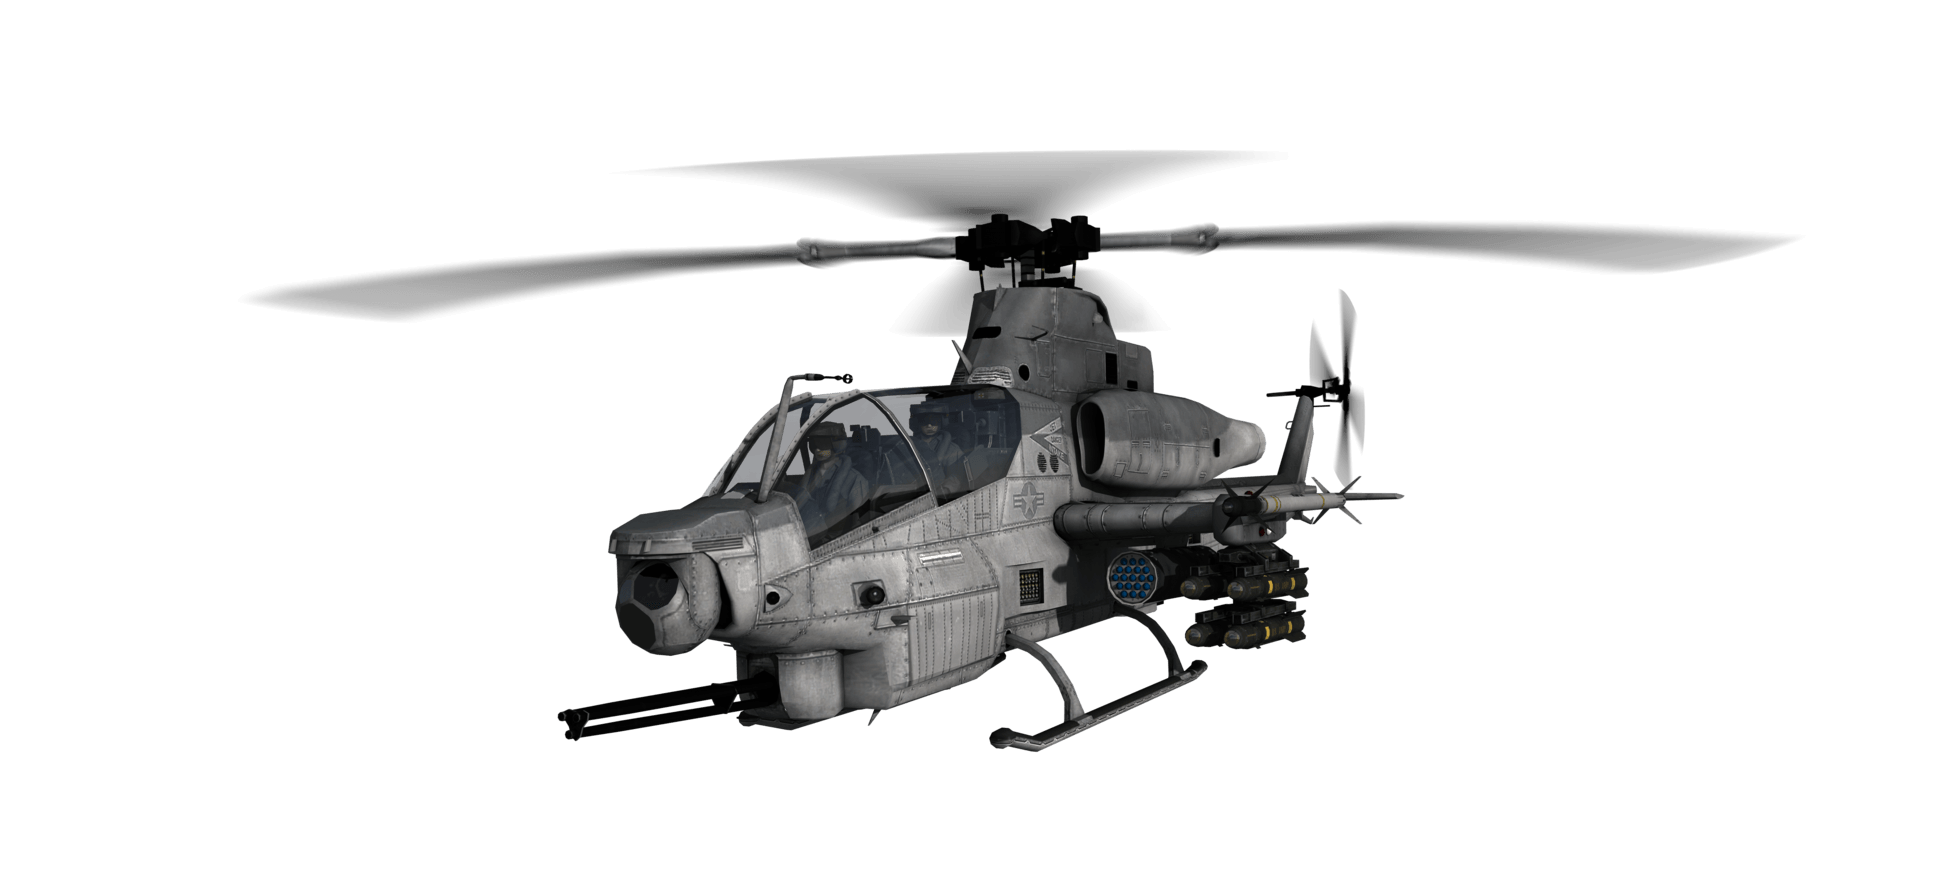 Illustration Army Helicopter PNG in Transparent pngteam.com